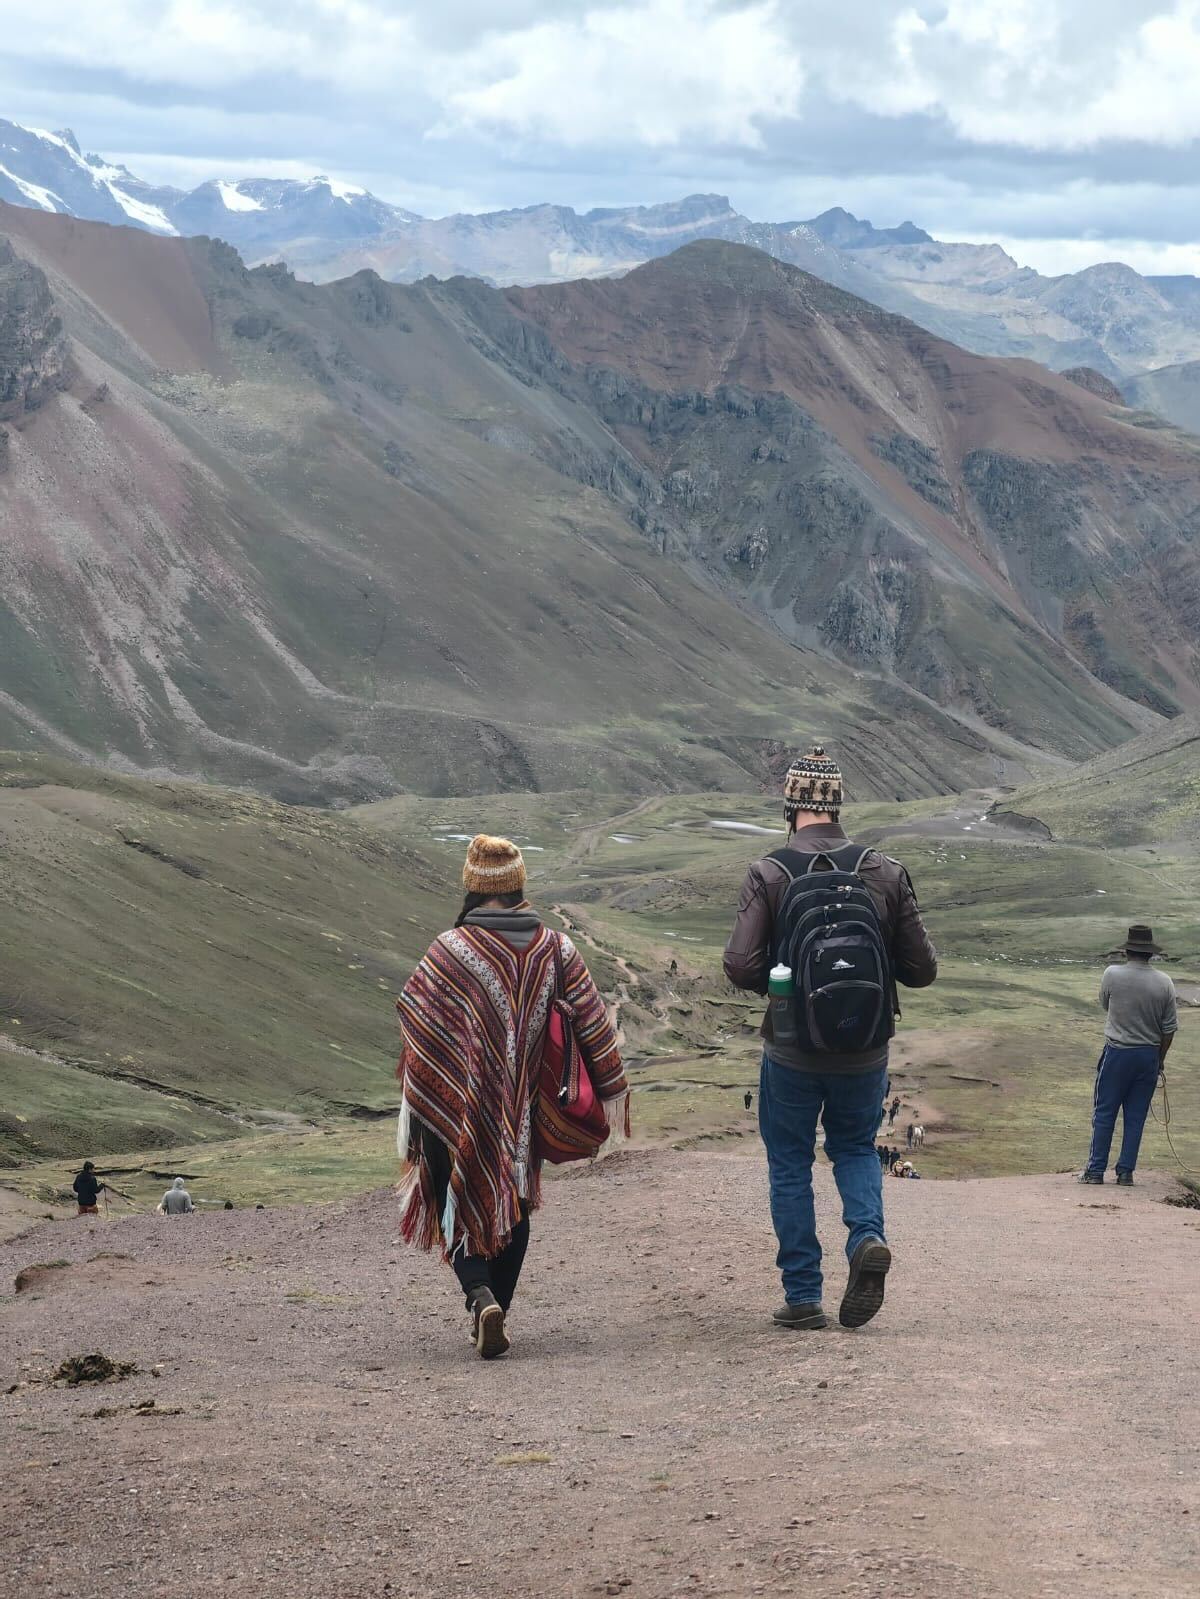 Two people dressed in warm clothing and hats walk down a mountain trail with rocky, green terrain and high peaks in the background. The person on the left wears a colorful shawl, while the person on the right carries a blue backpack. Other hikers are seen in the distance.